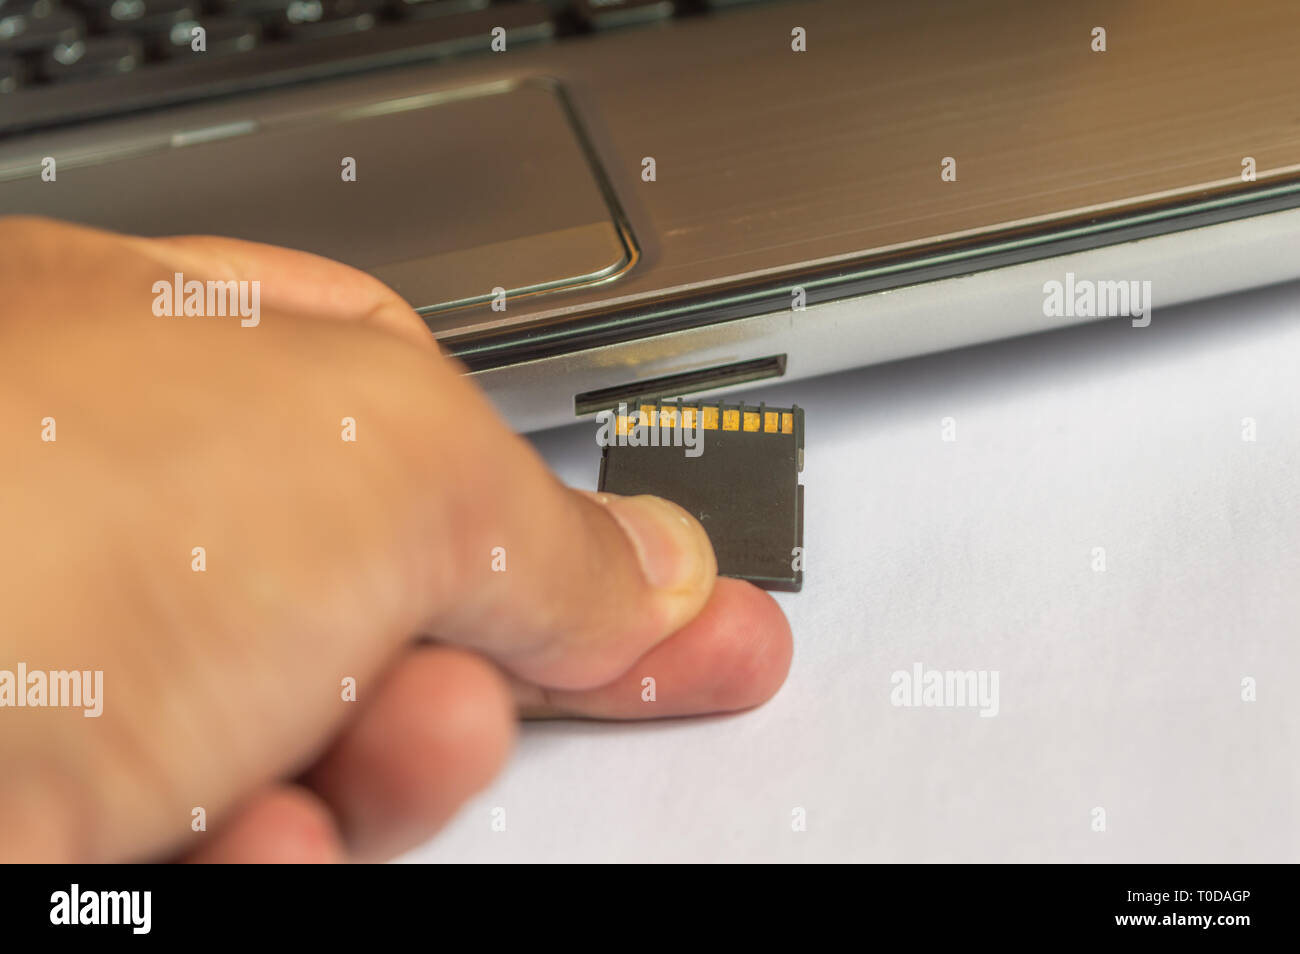 Inserting memory card flash drive into a computer laptop Stock Photo